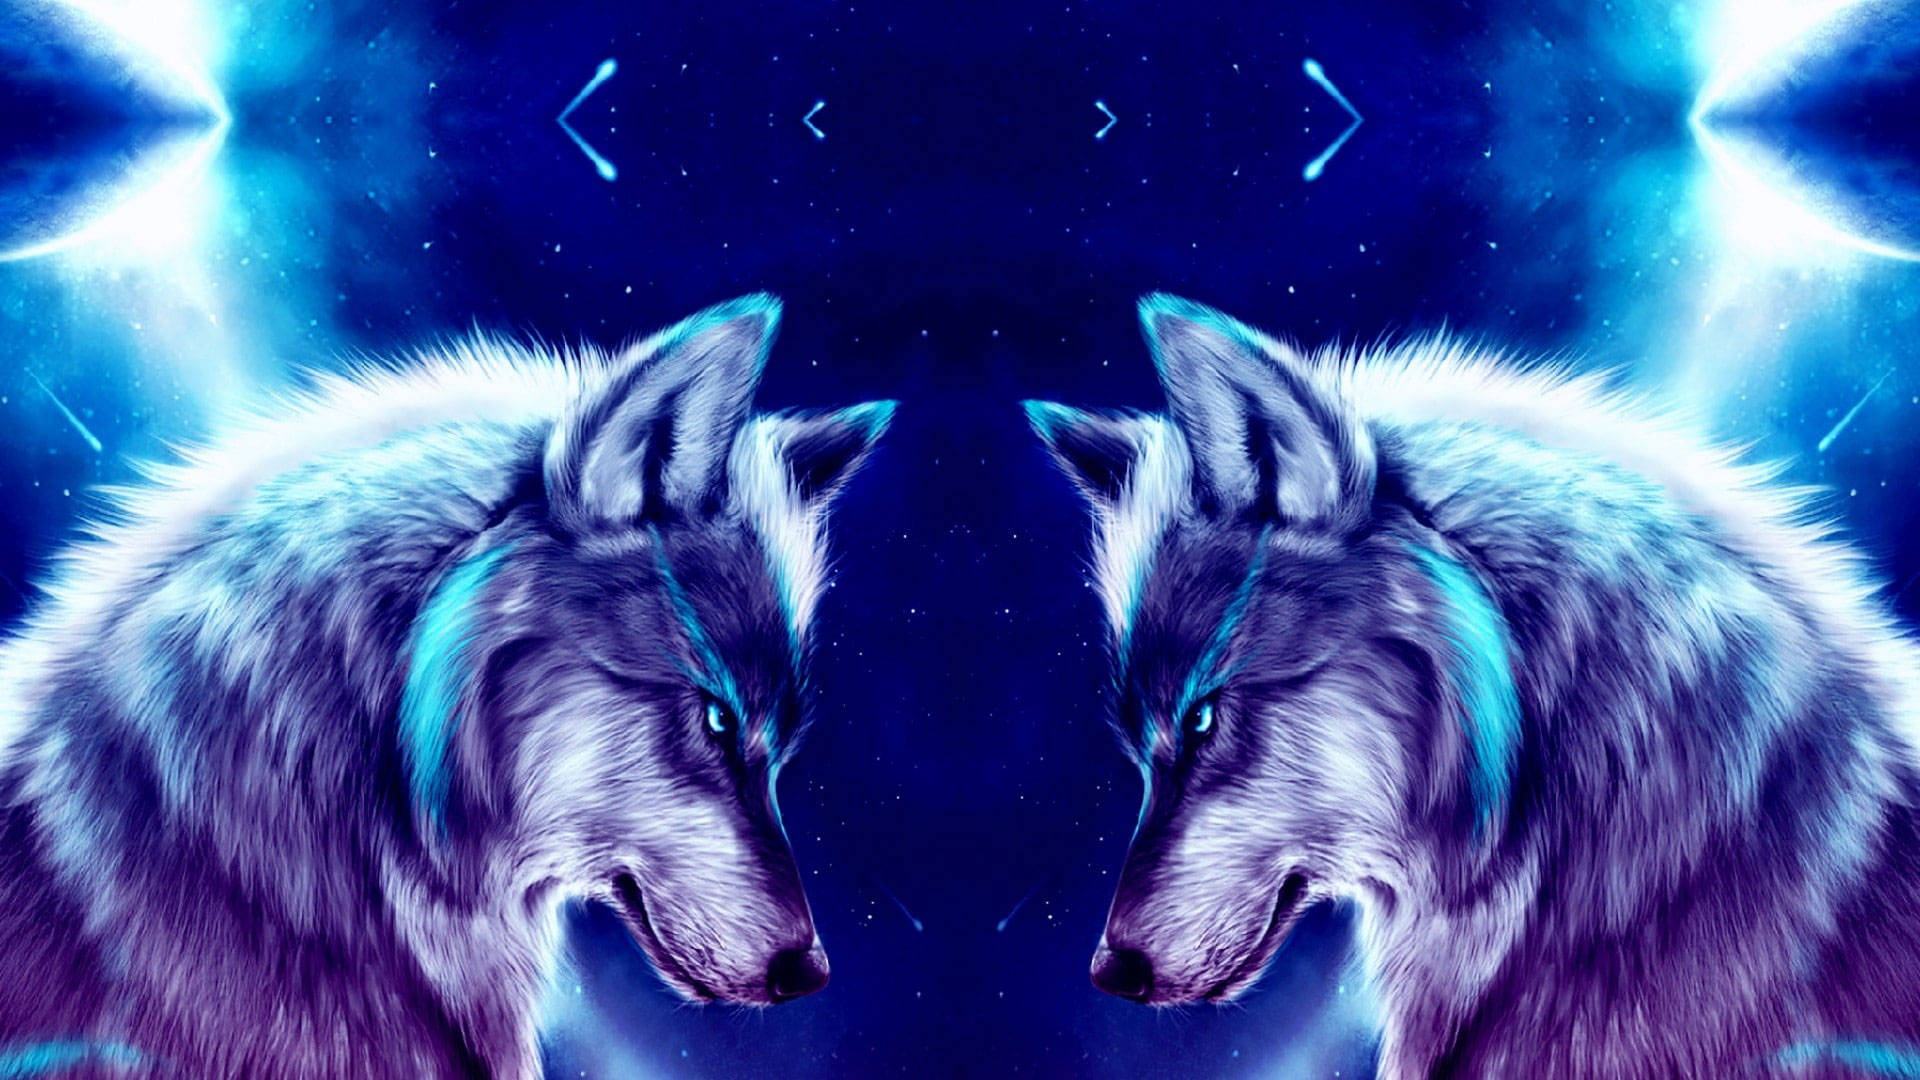 Cool Galaxy Wolf - Two Wolves Gazing At The Stars